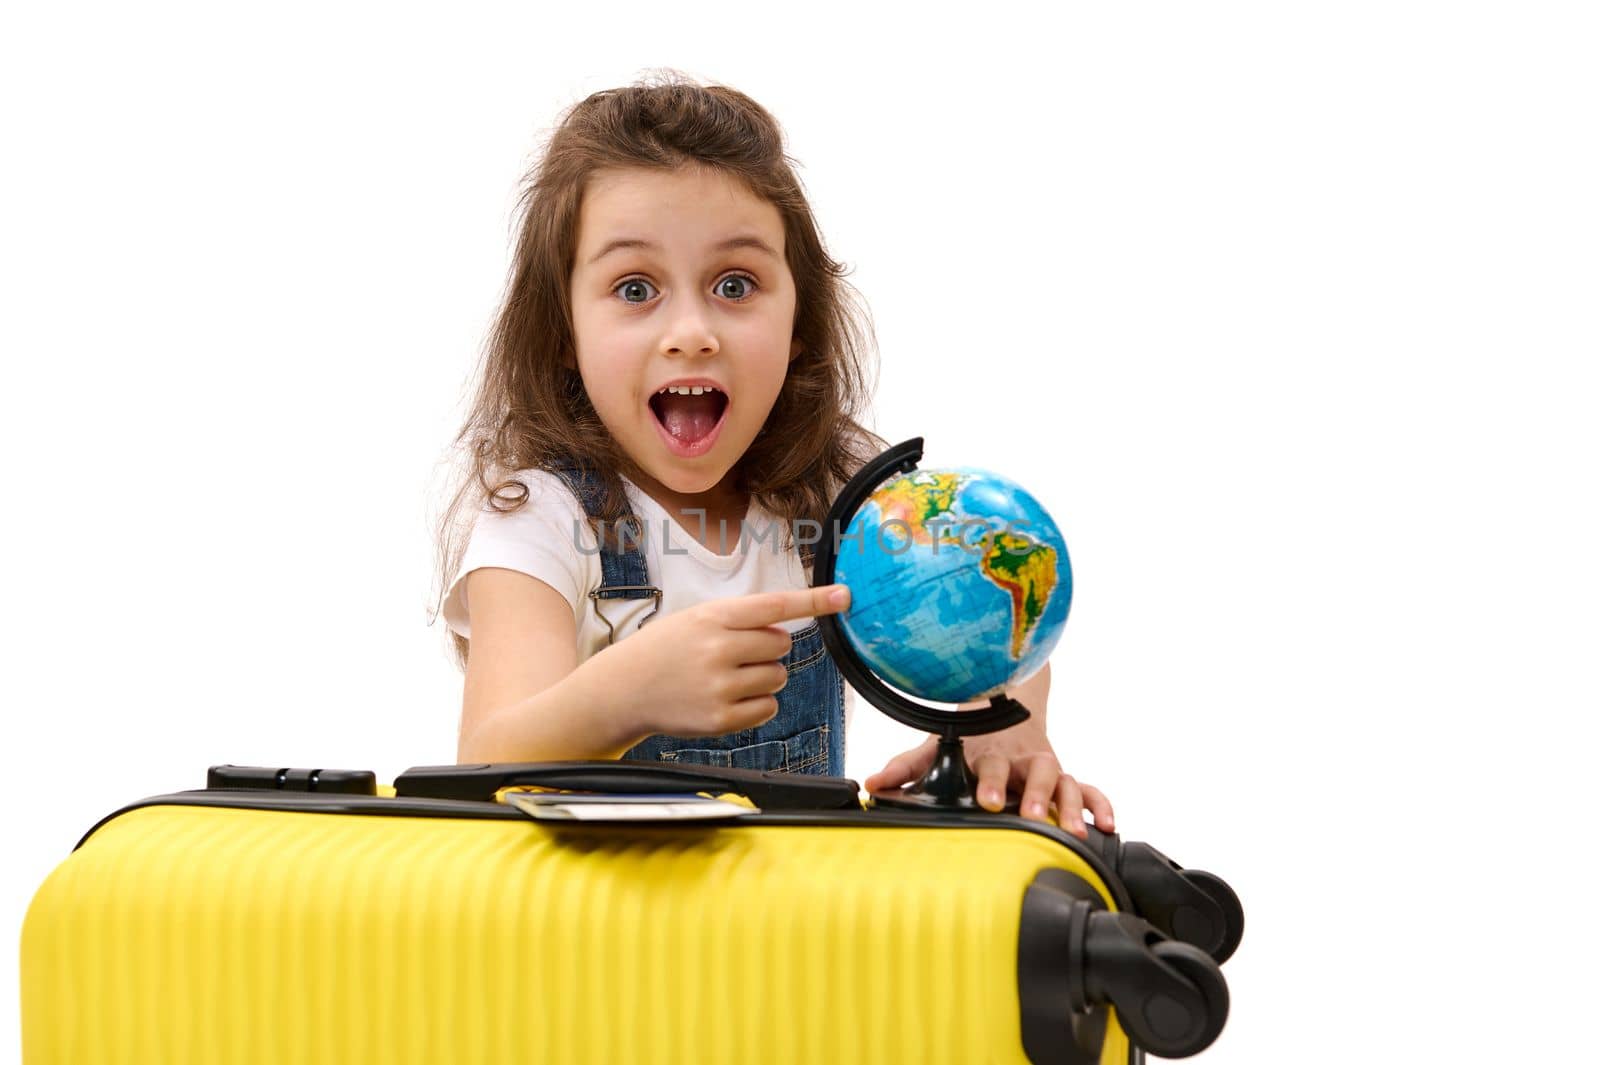 Cute little girl traveler with a yellow suitcase points to a destination on the globe, looking at the camera in surprise by artgf